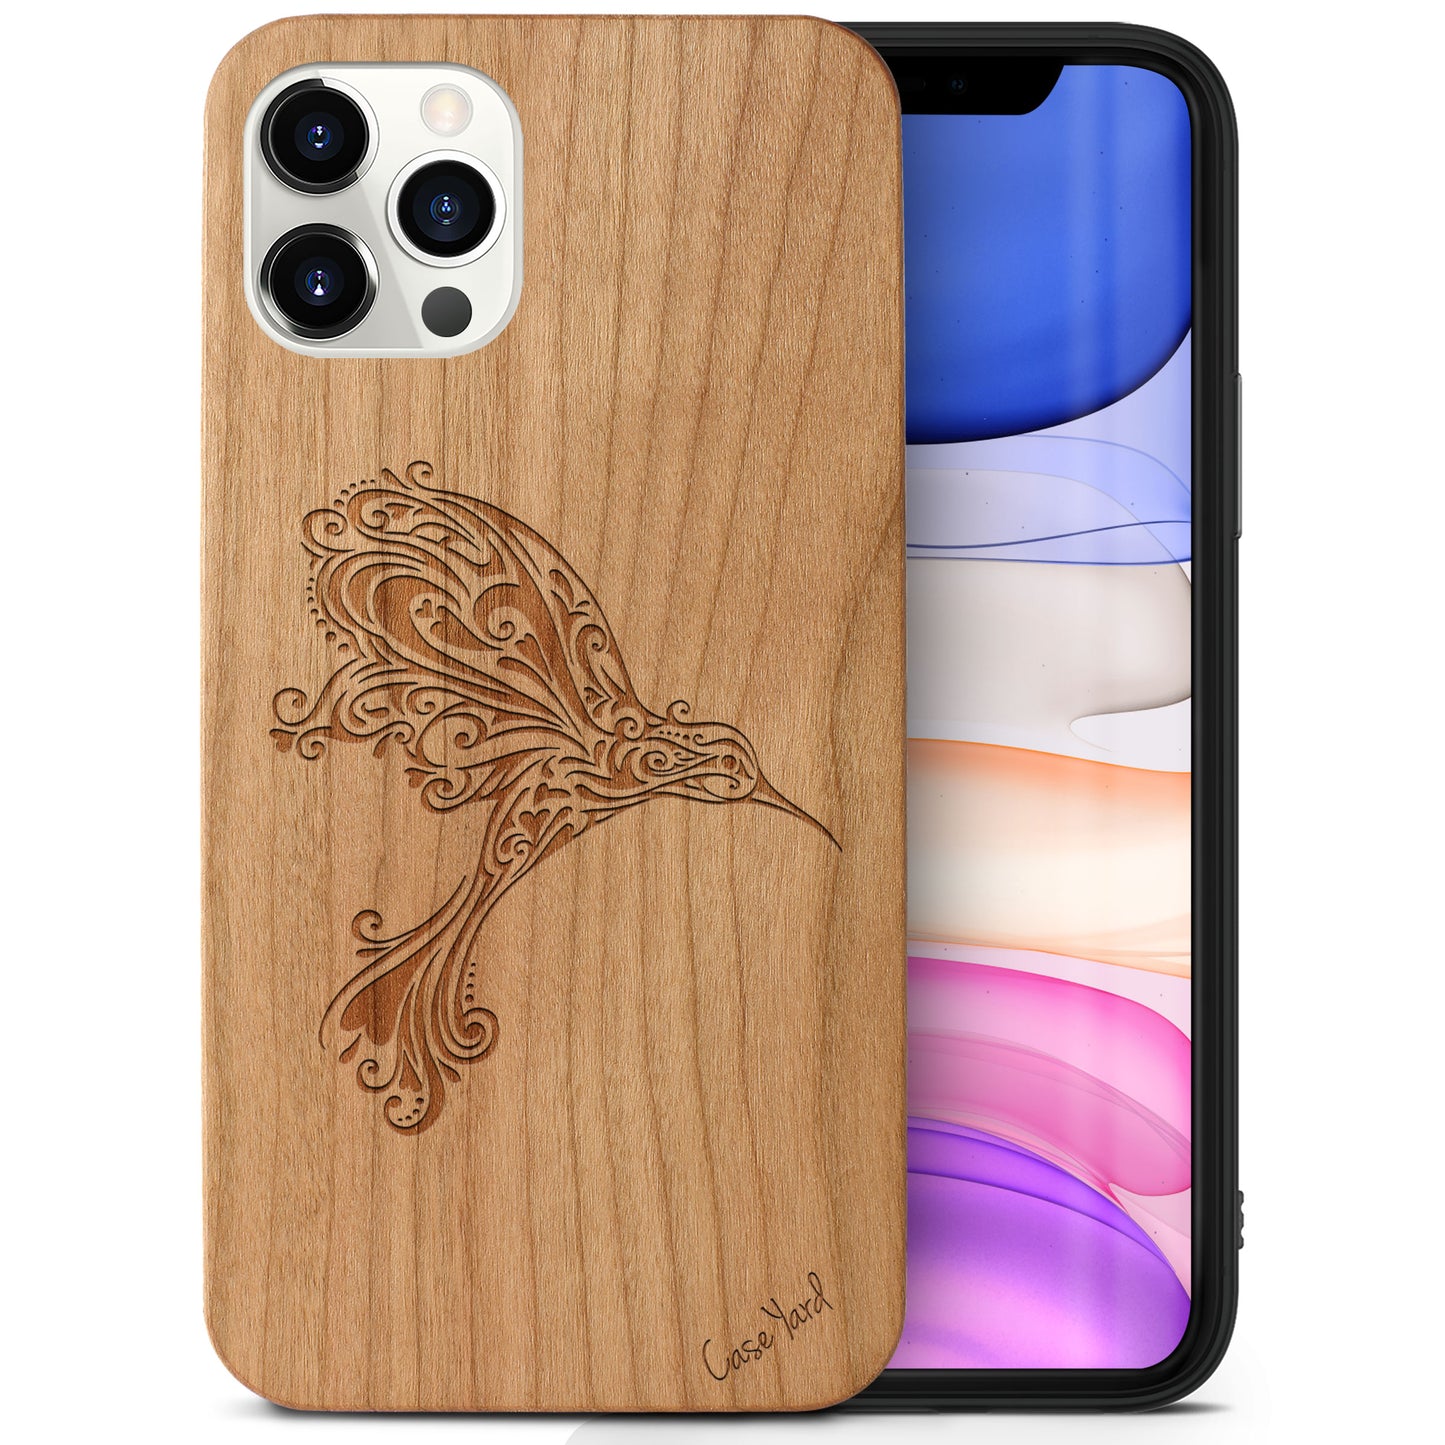 Wooden Cell Phone Case Cover, Laser Engraved case for iPhone & Samsung phone Humming Bird Design